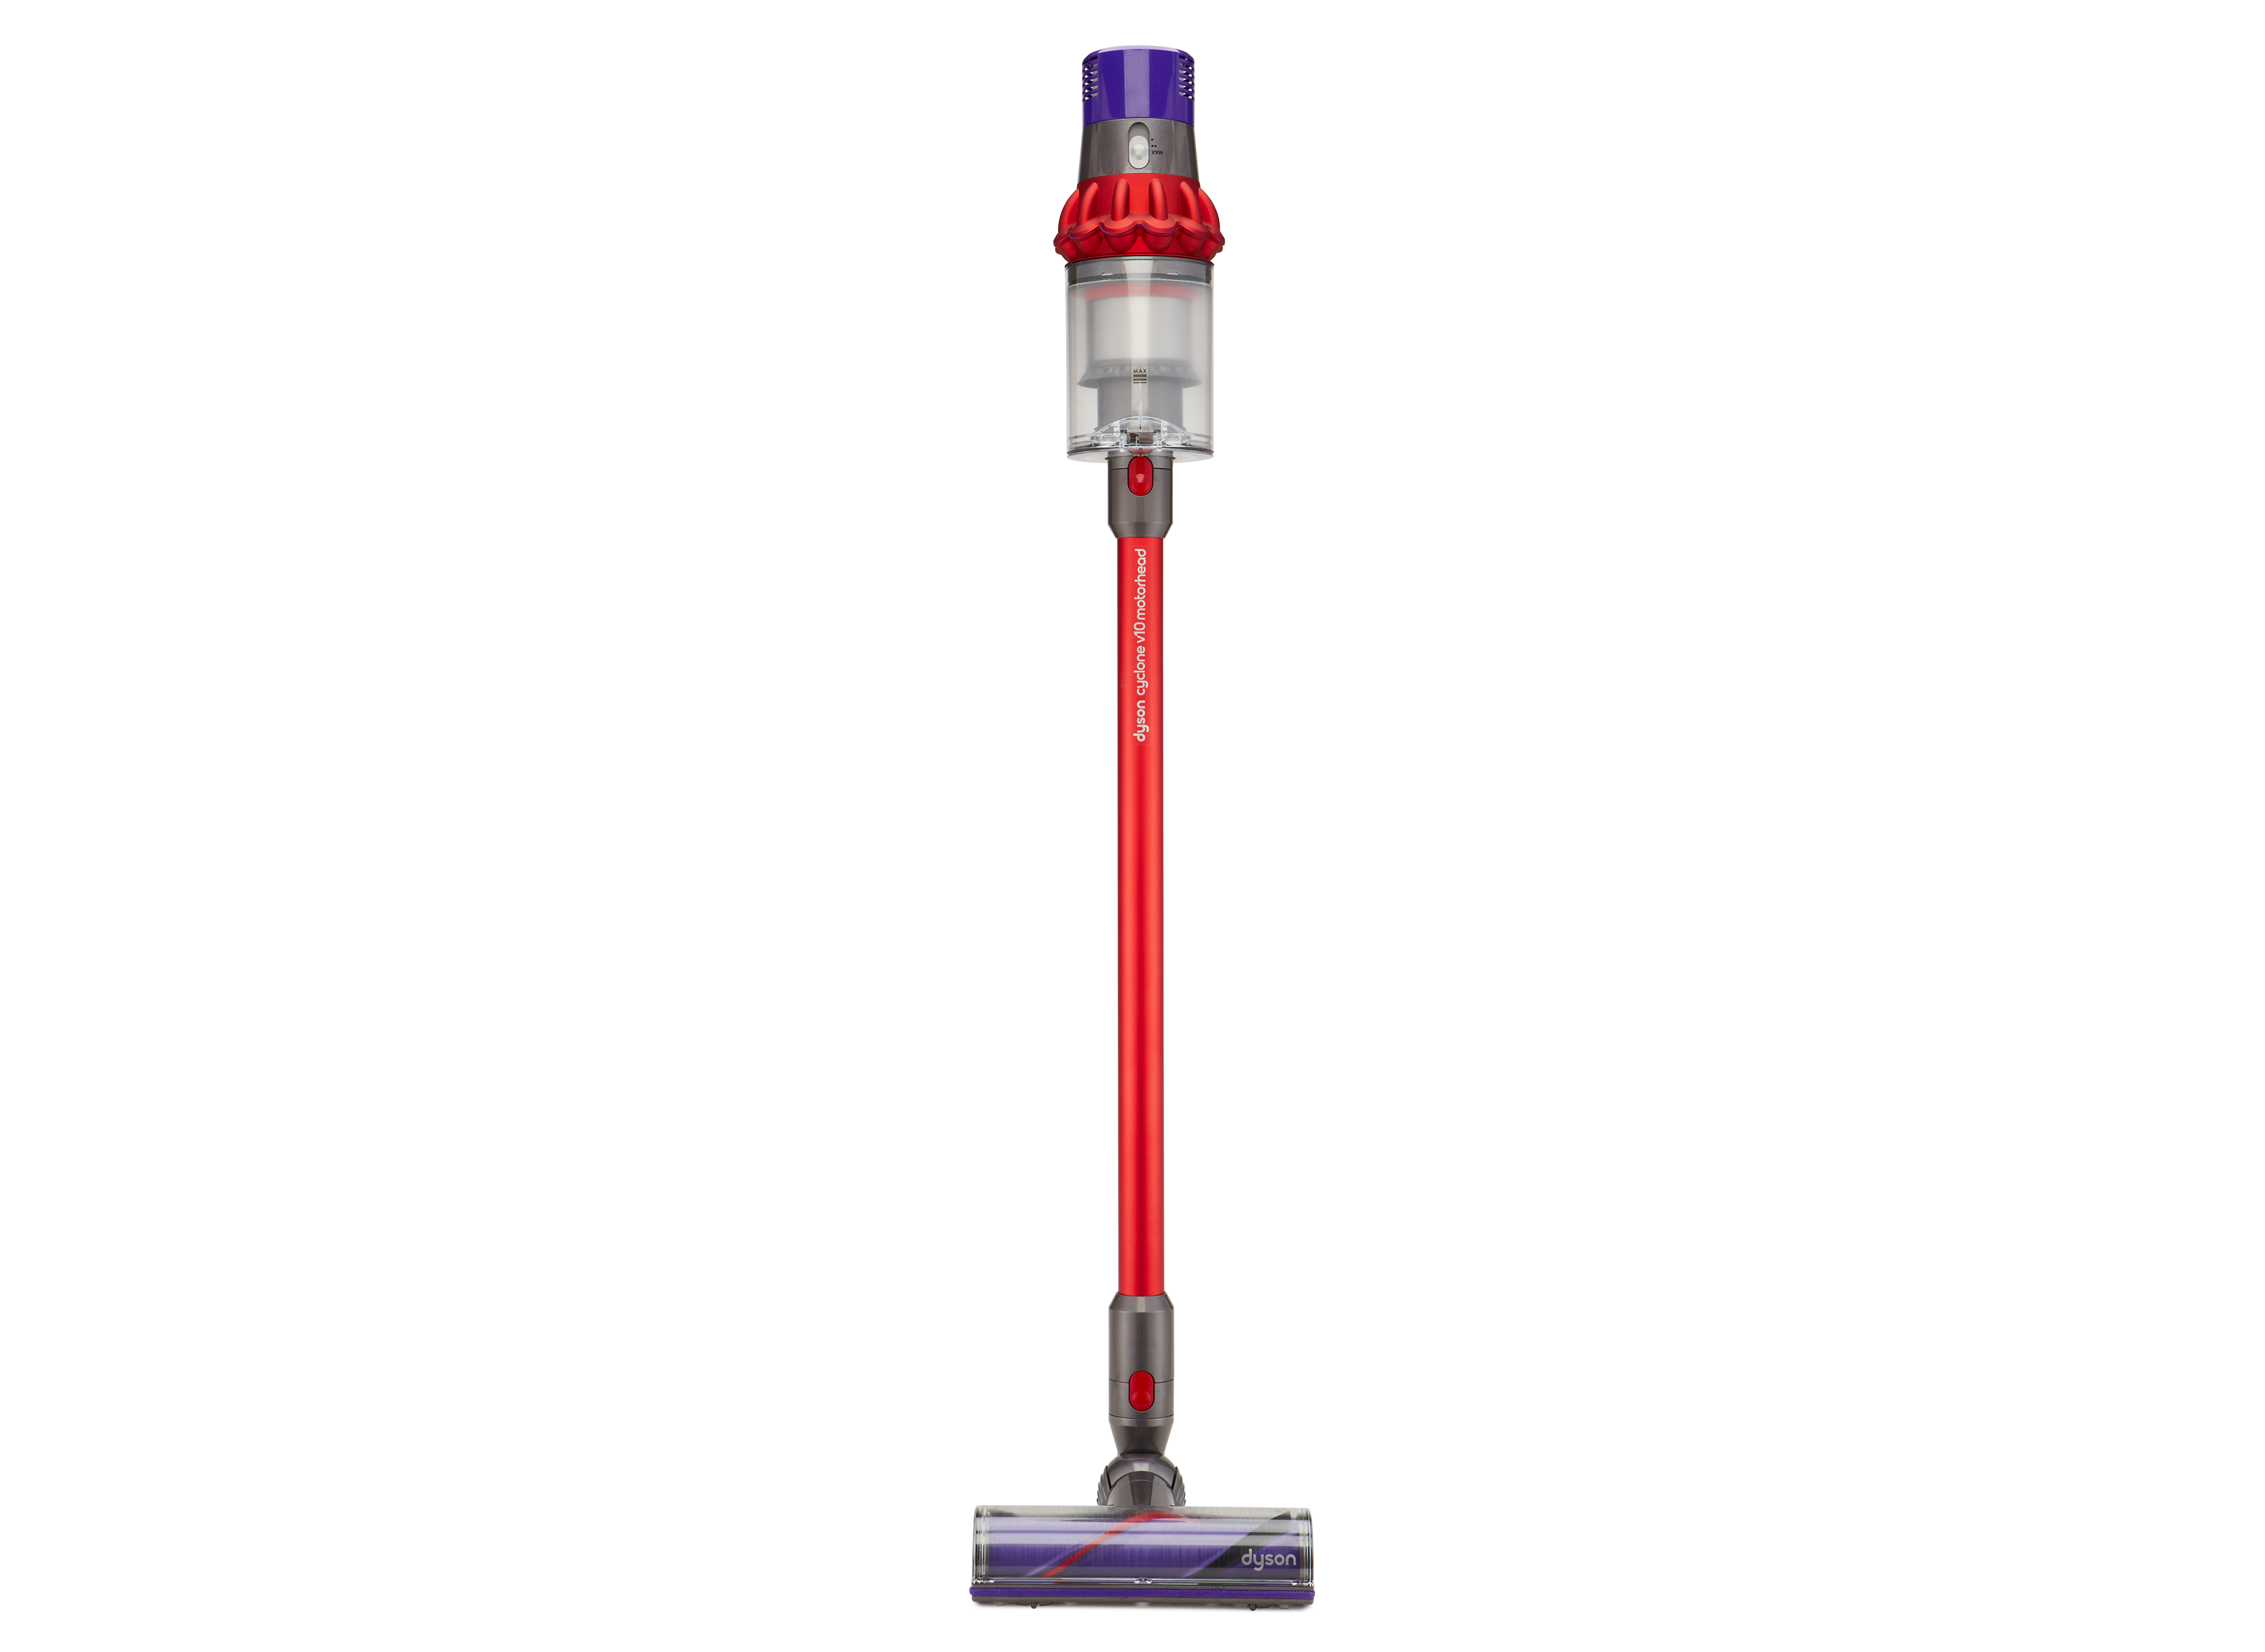 Dyson Cyclone V10 Motorhead Vacuum Cleaner Review - Consumer Reports